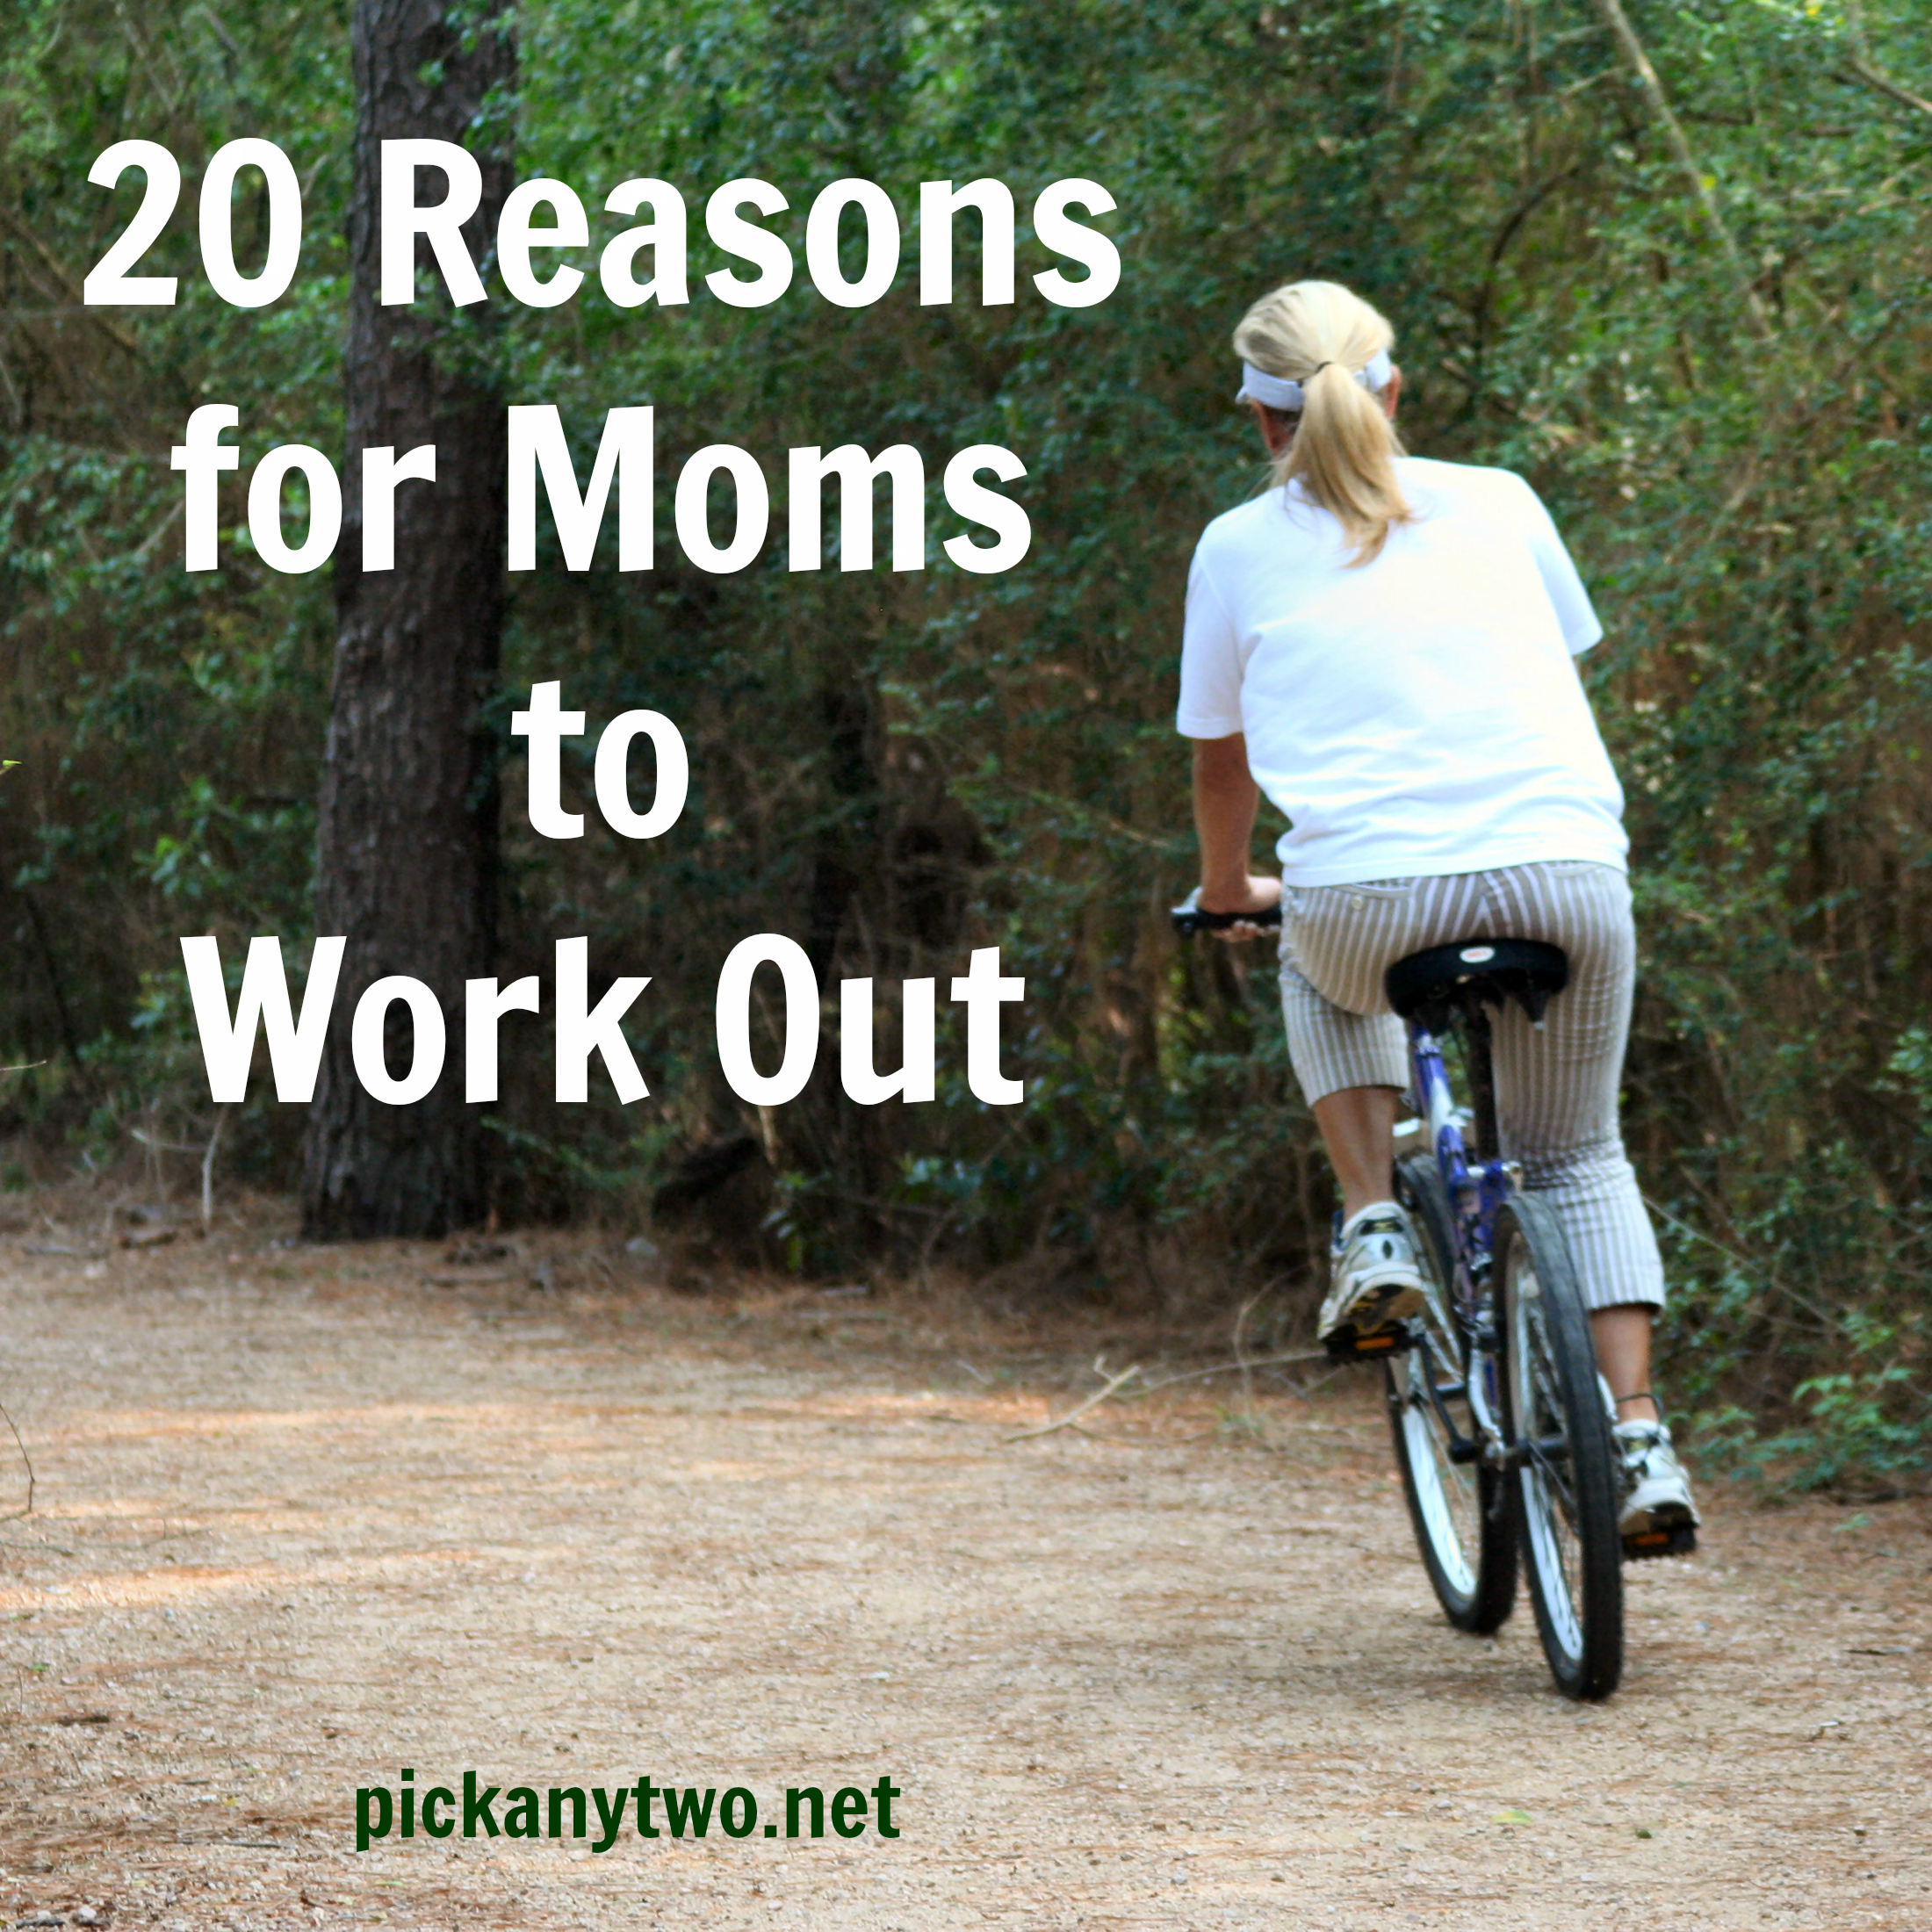 Reasons for Moms to Work Out